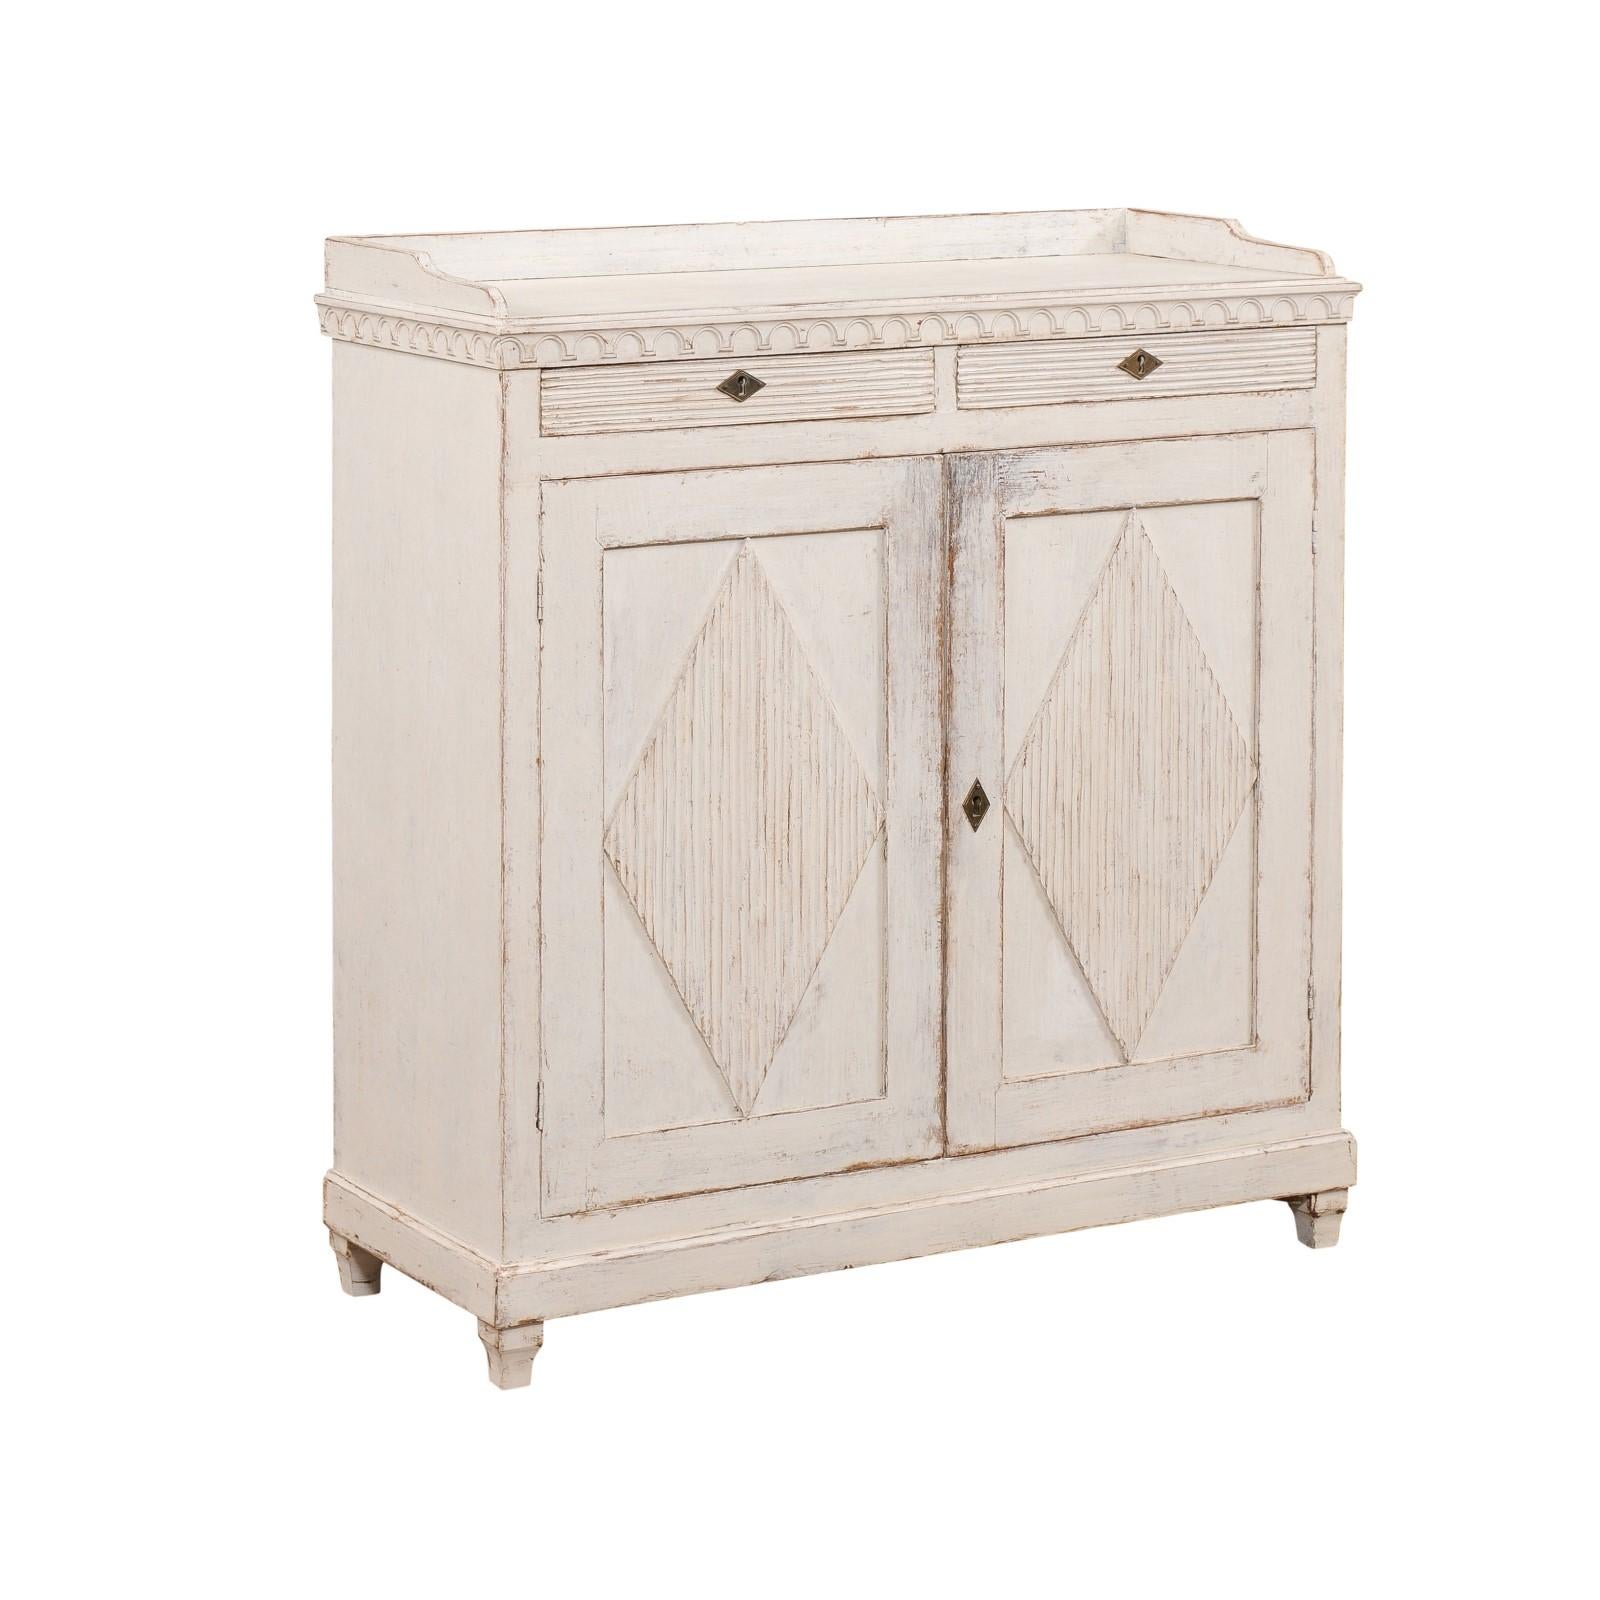 A Swedish Gustavian period painted wood sideboard from the early 19th century, with three-quarter gallery, carved frieze, two drawers, two doors and reeded diamond motifs. Created in Sweden during the early years of the 19th century, this painted